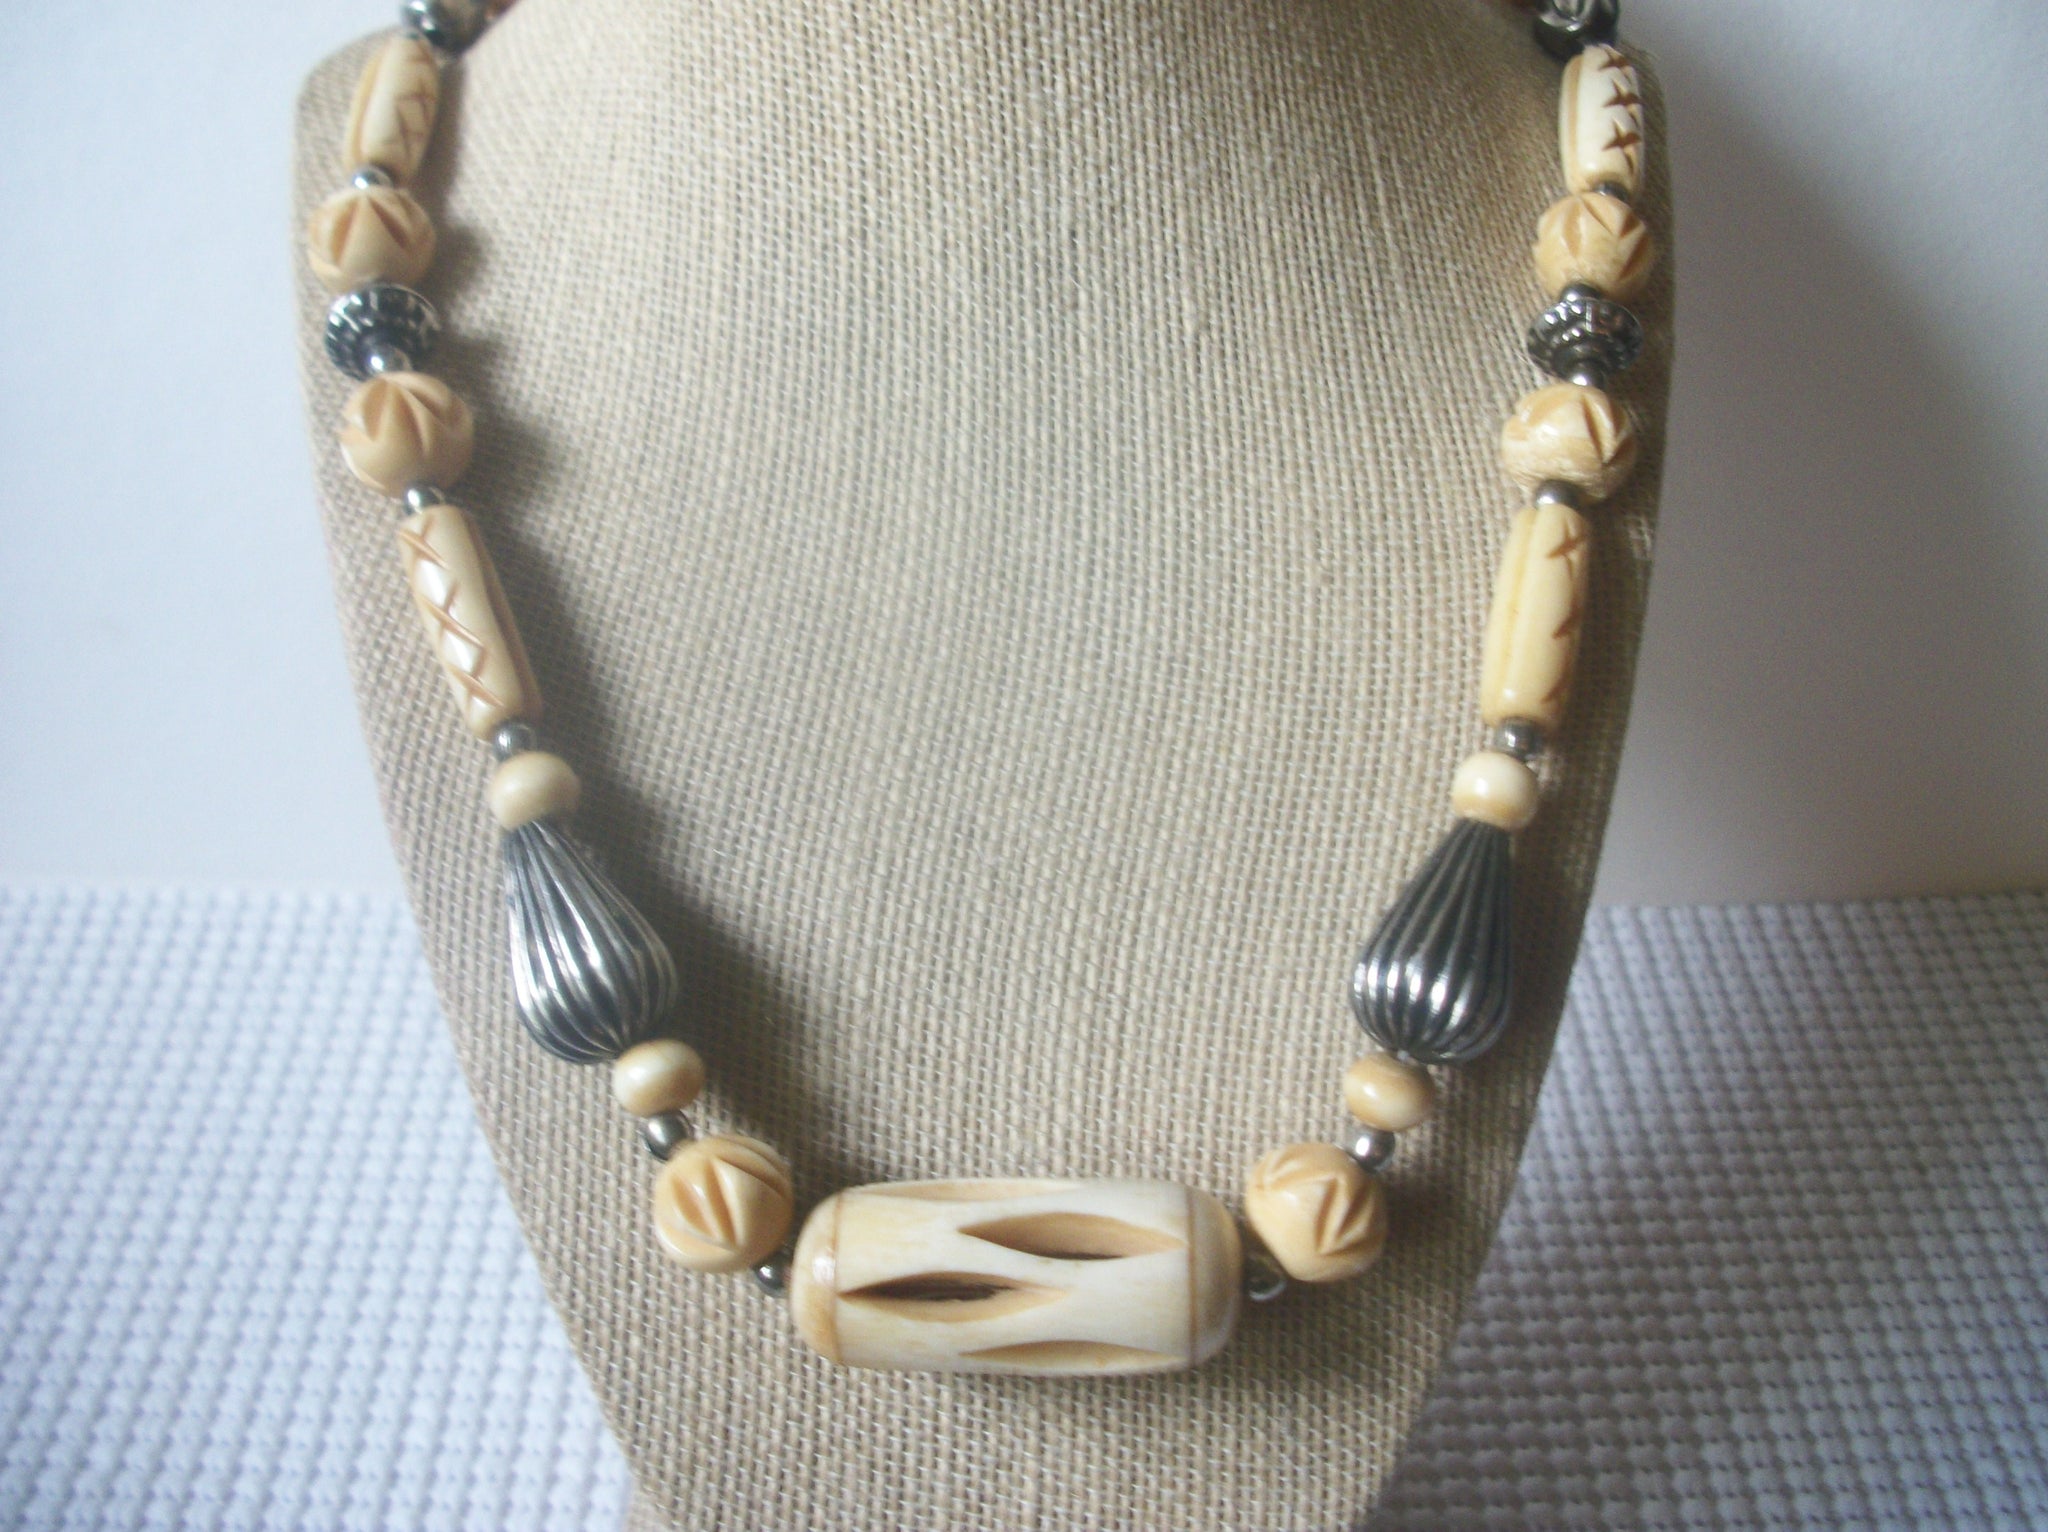 Vintage 1960s Tribal Carved Bone Distressed Silver Metal Beads 24" Long Necklace 112016